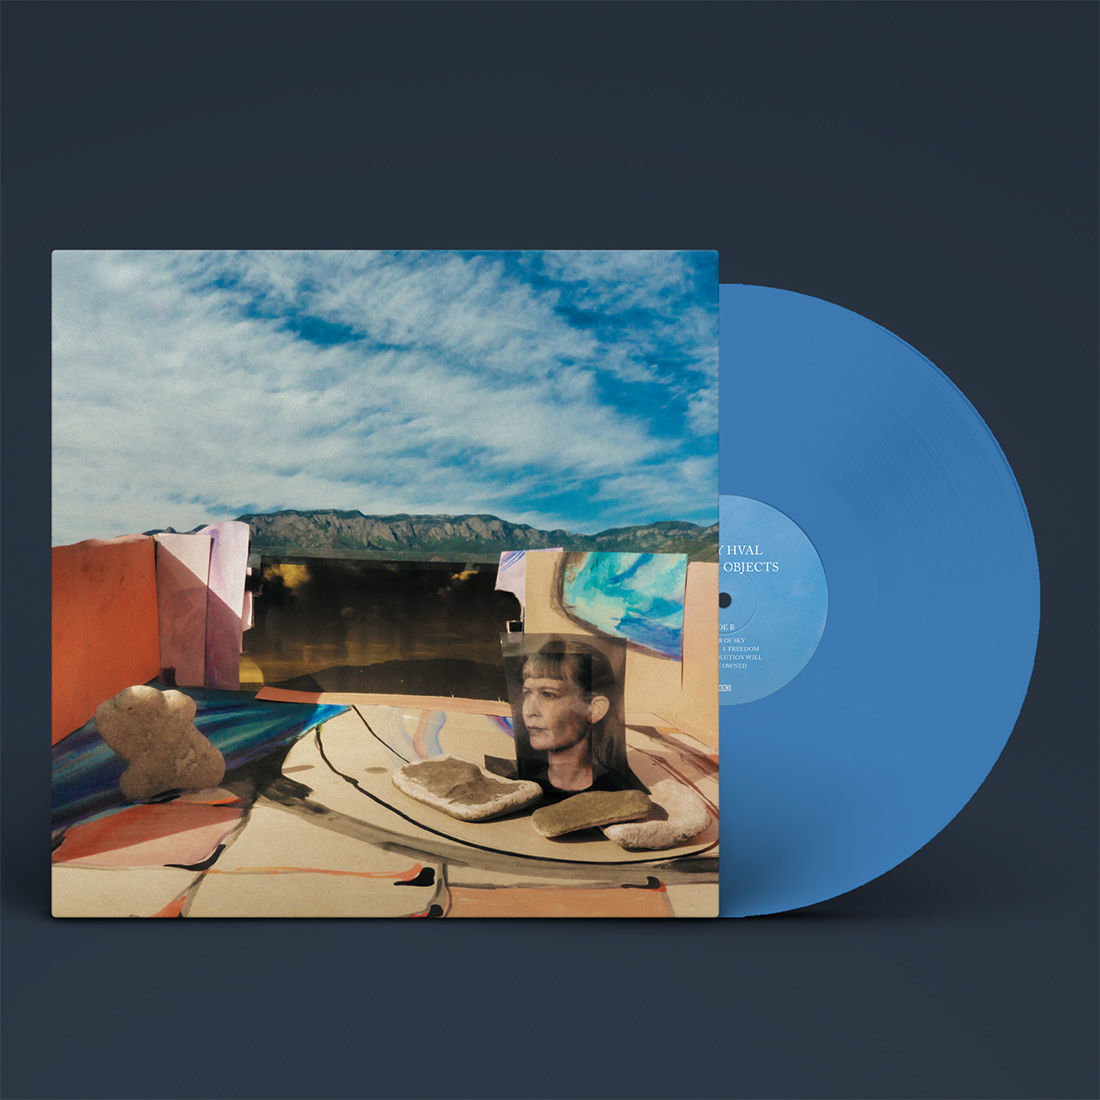 Jenny Hval - Classic Objects: Limited Edition Blue Vinyl LP